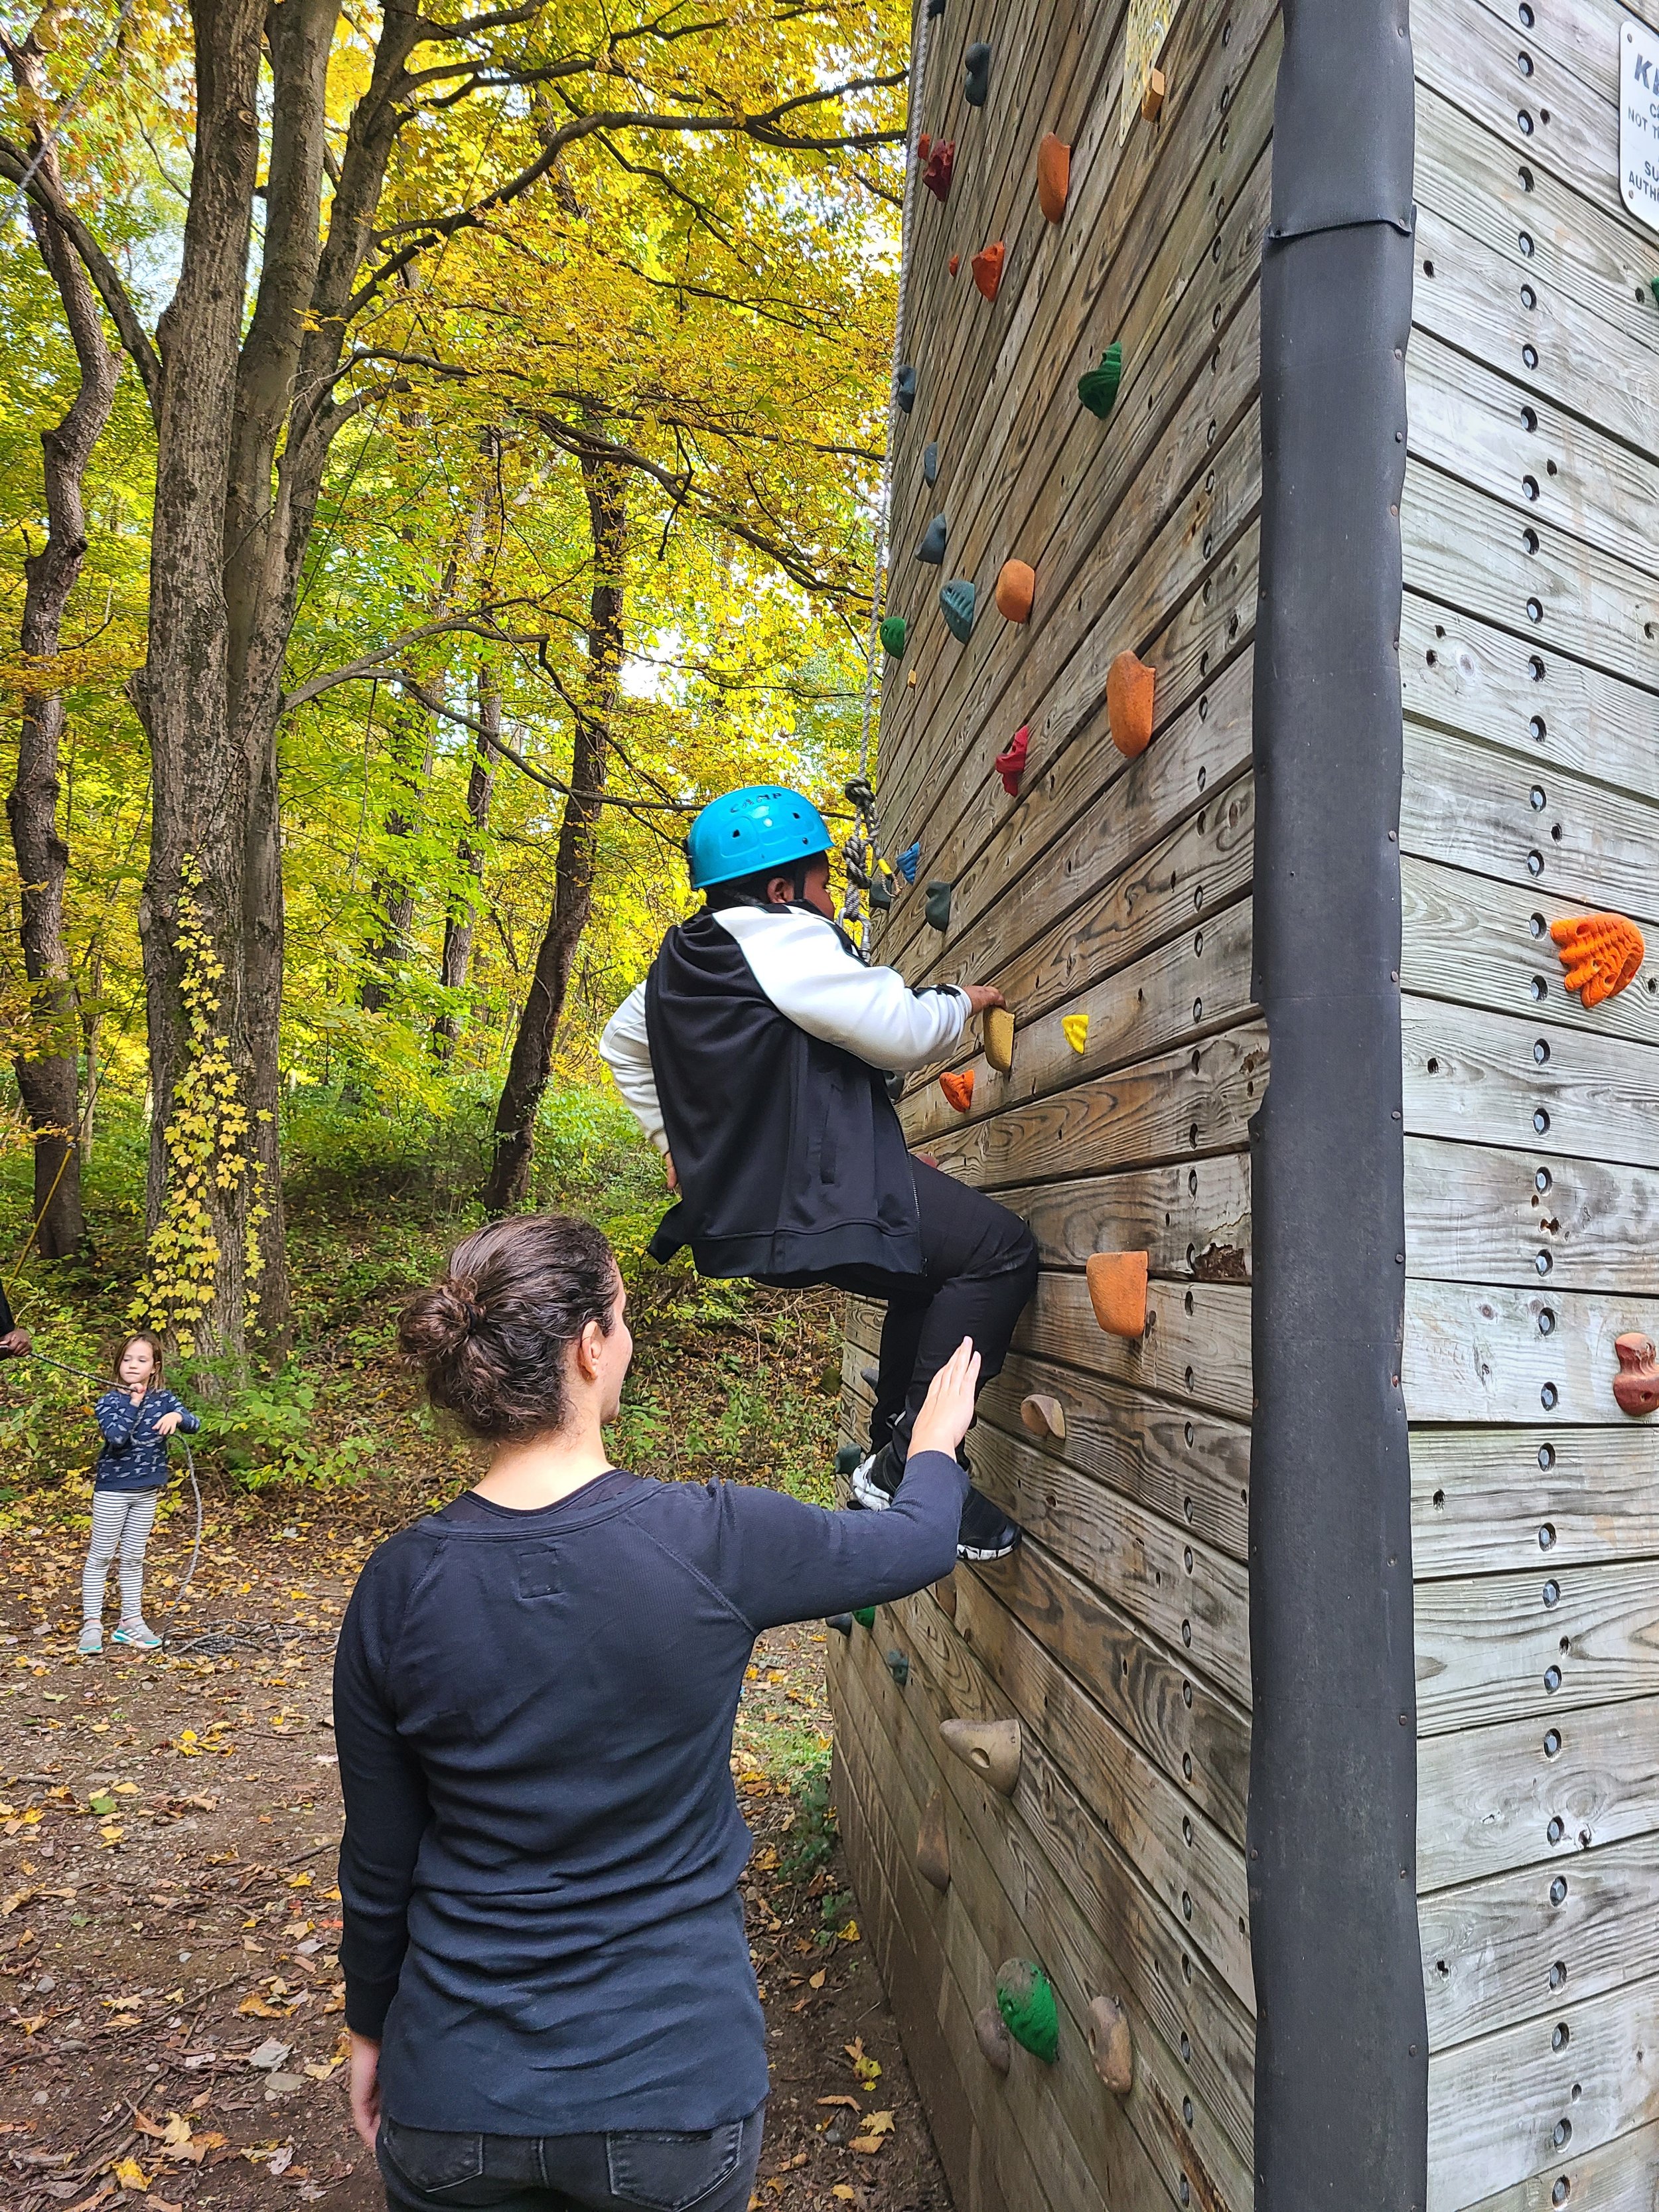 Elementary students climbing walls at camp with Corlears